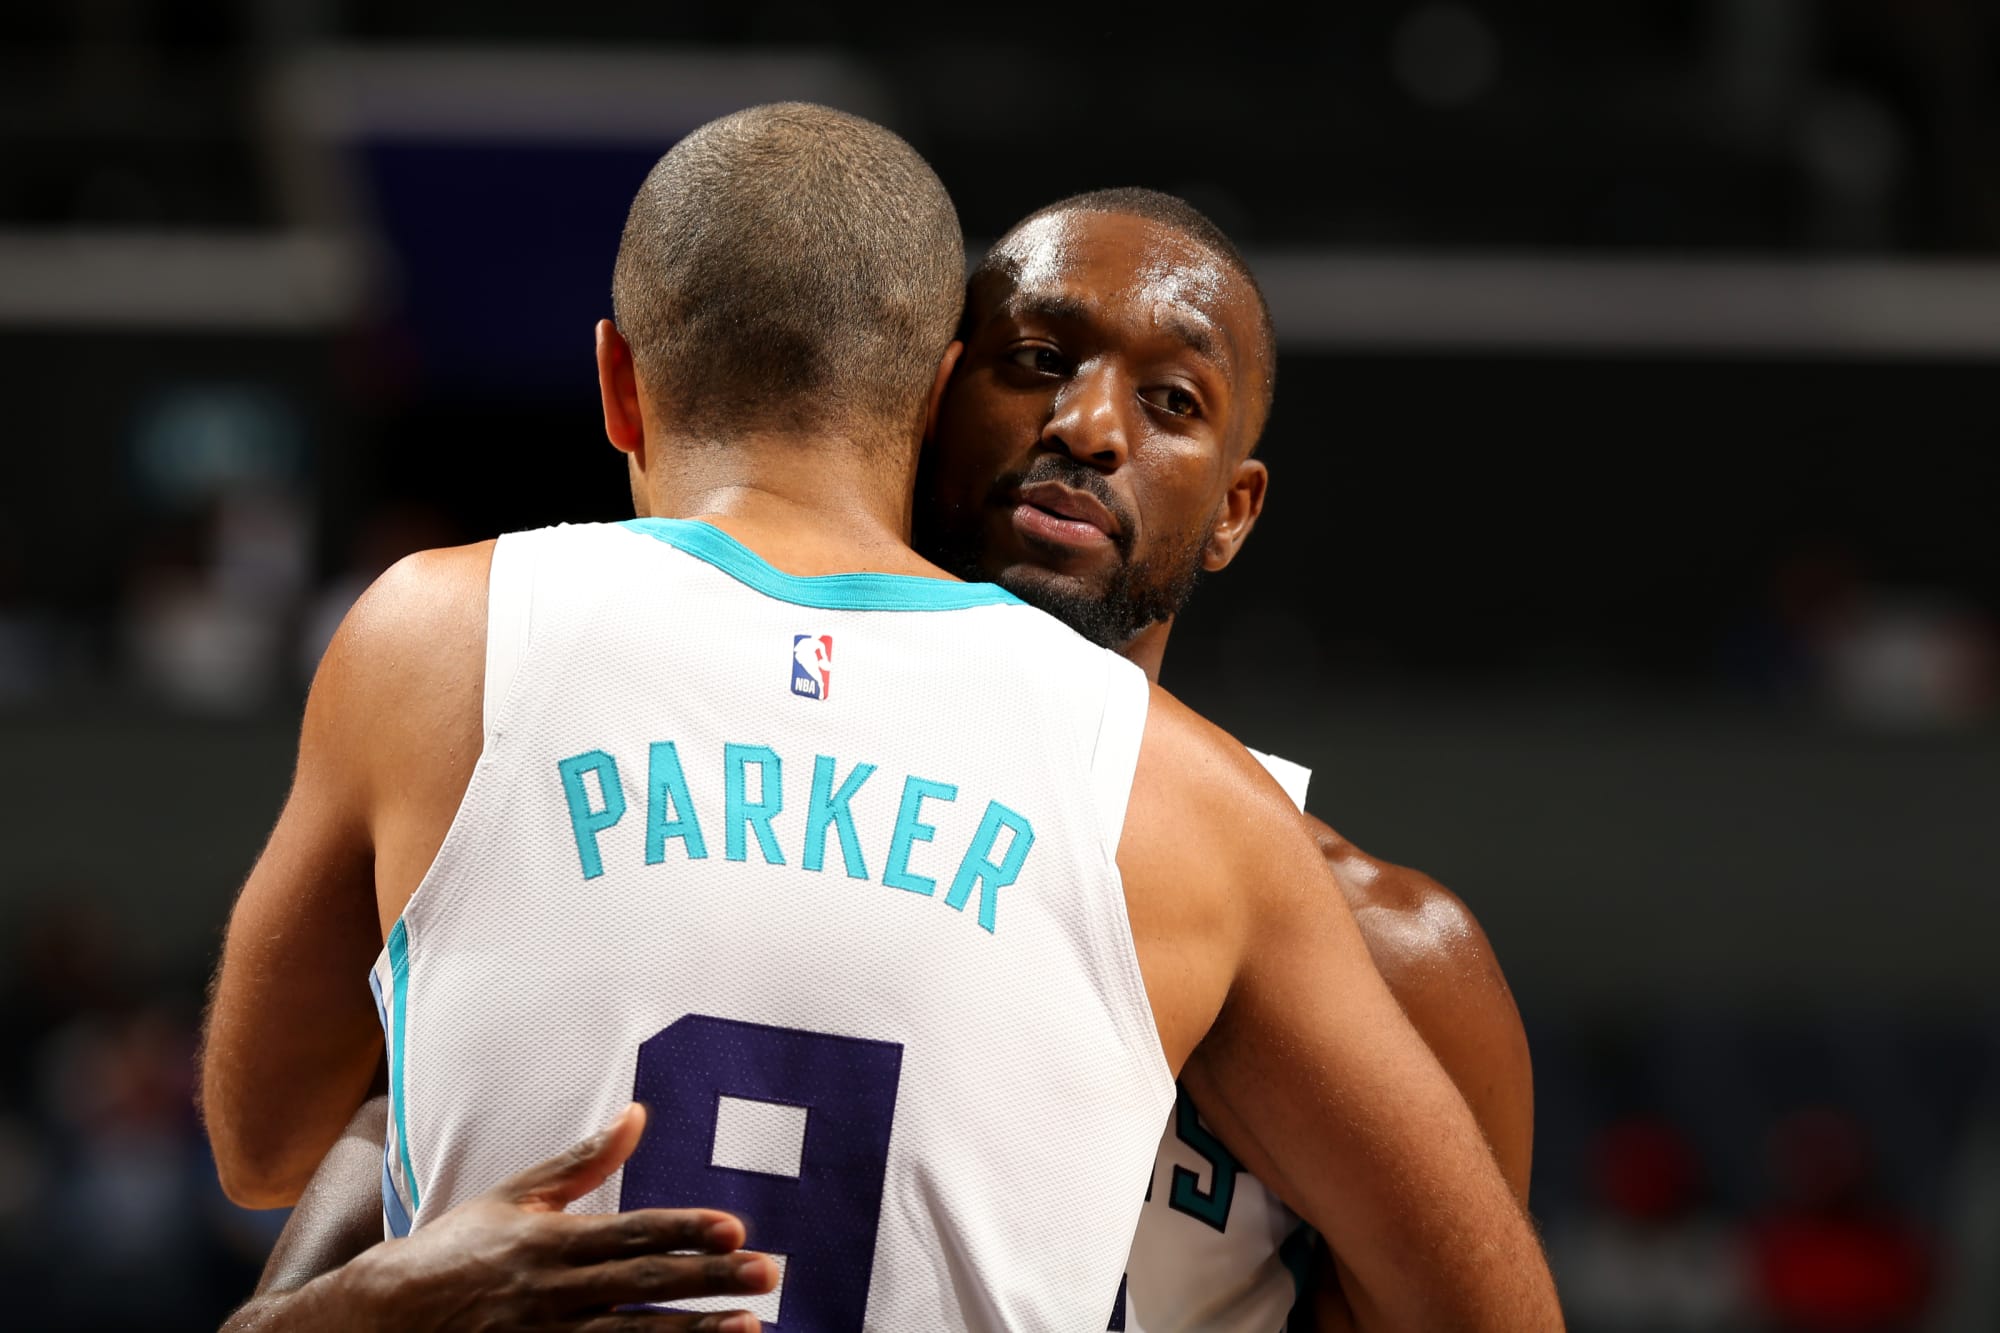 Tony Parker says he's ready to contribute in Charlotte